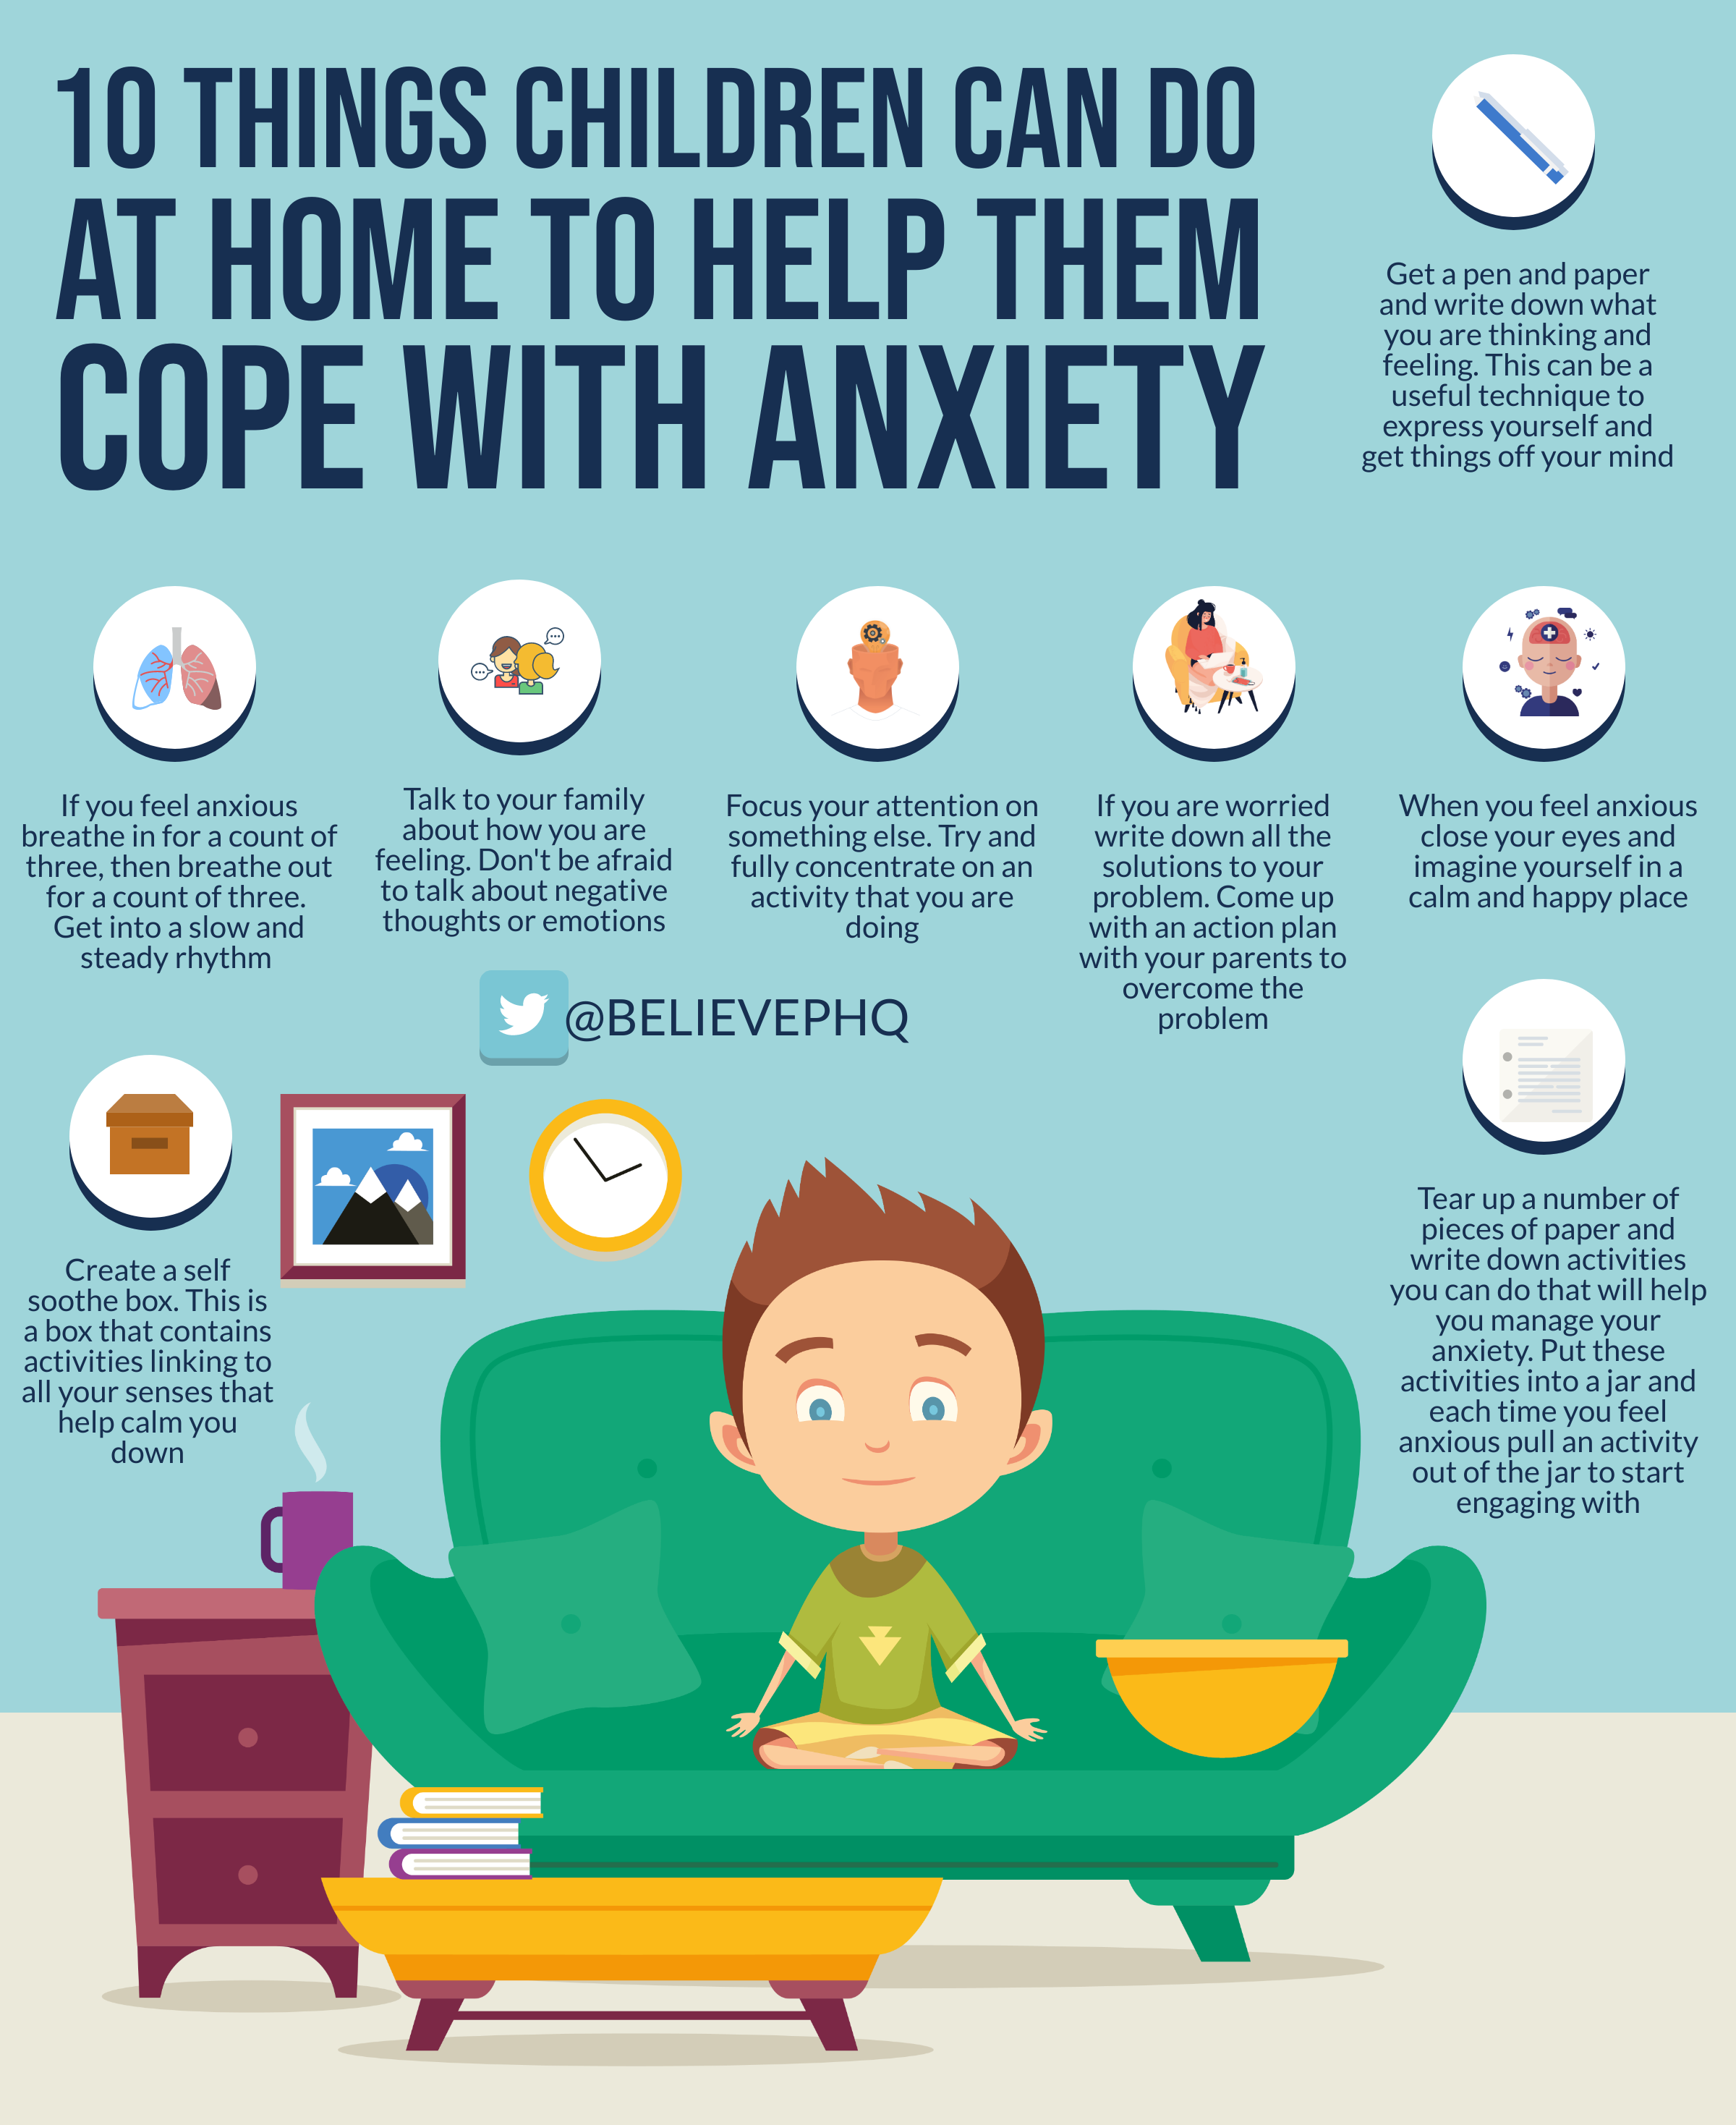 10-things-children-can-do-at-home-to-cope-with-anxiety DASHBC.png